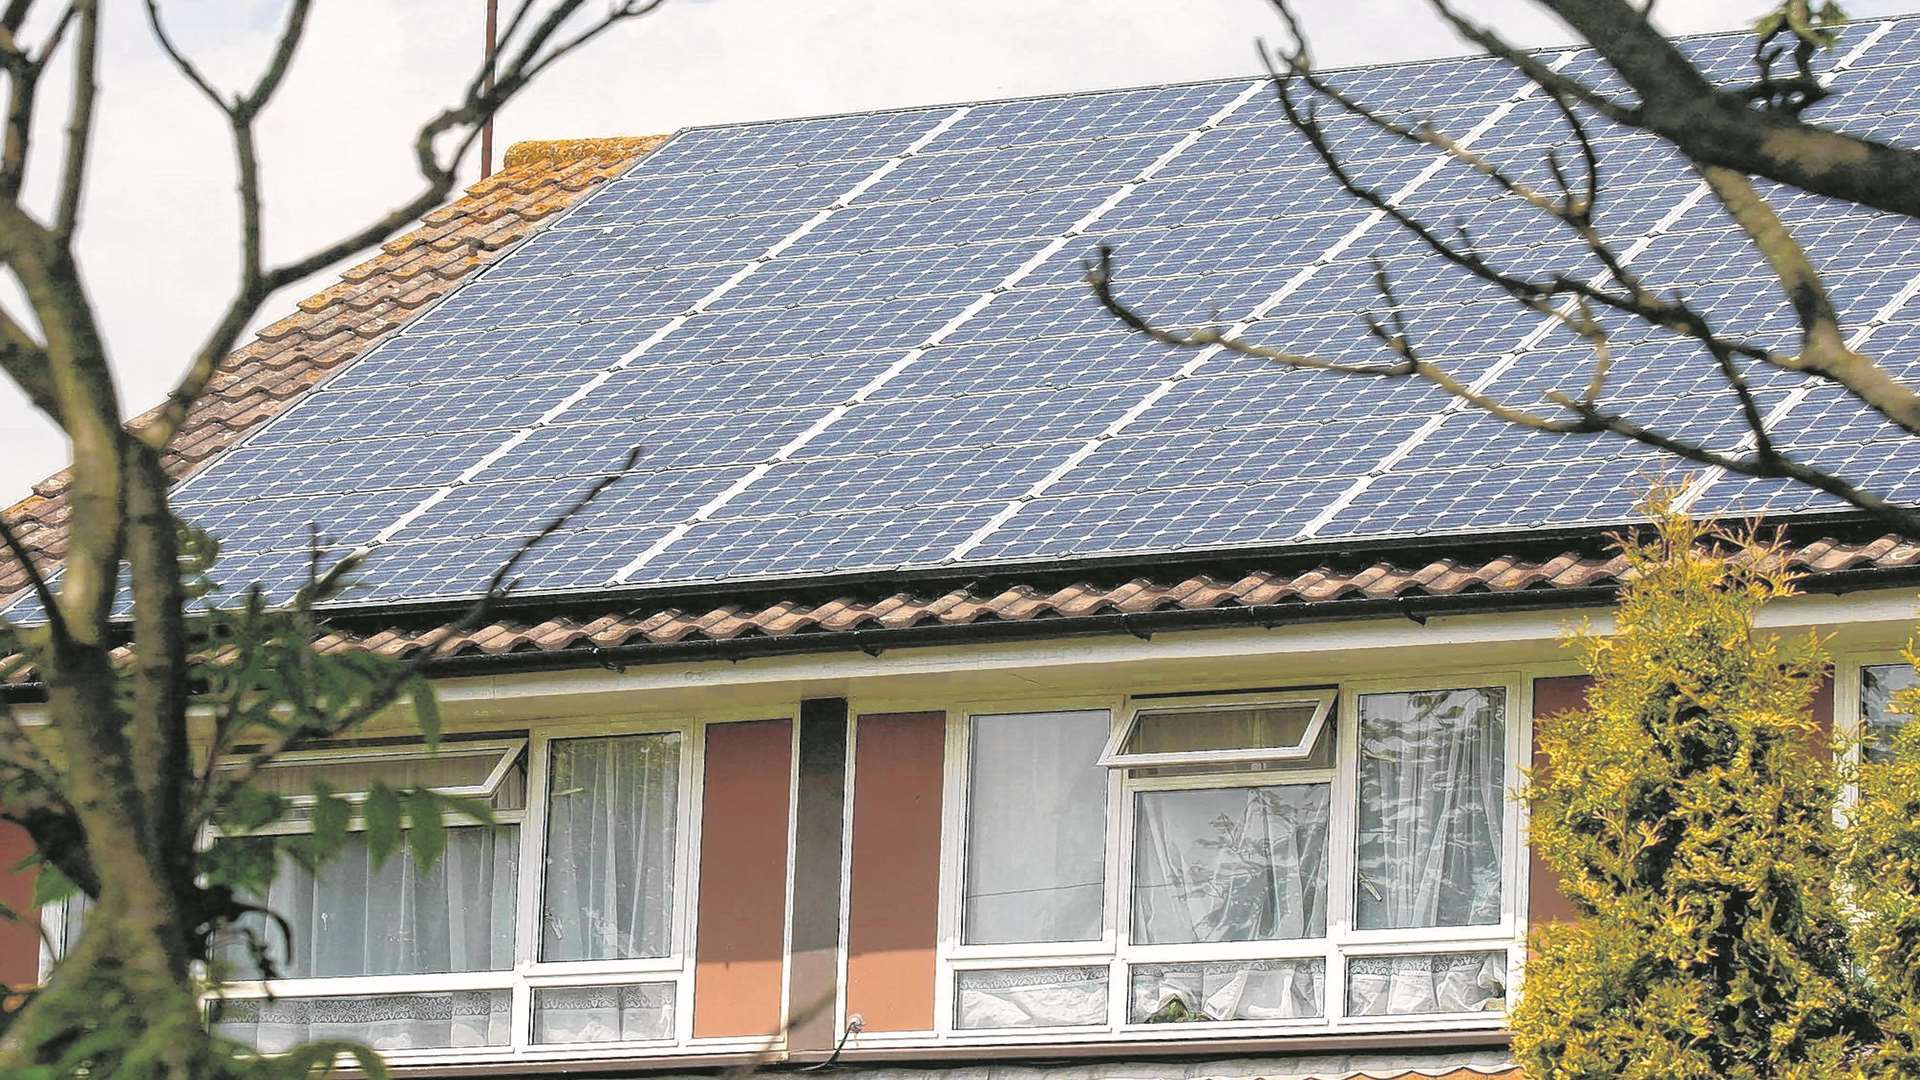 Fewer people are carrying out renewable energy projects like adding solar panels to their homes but Kent is leading the way in battery storage projects